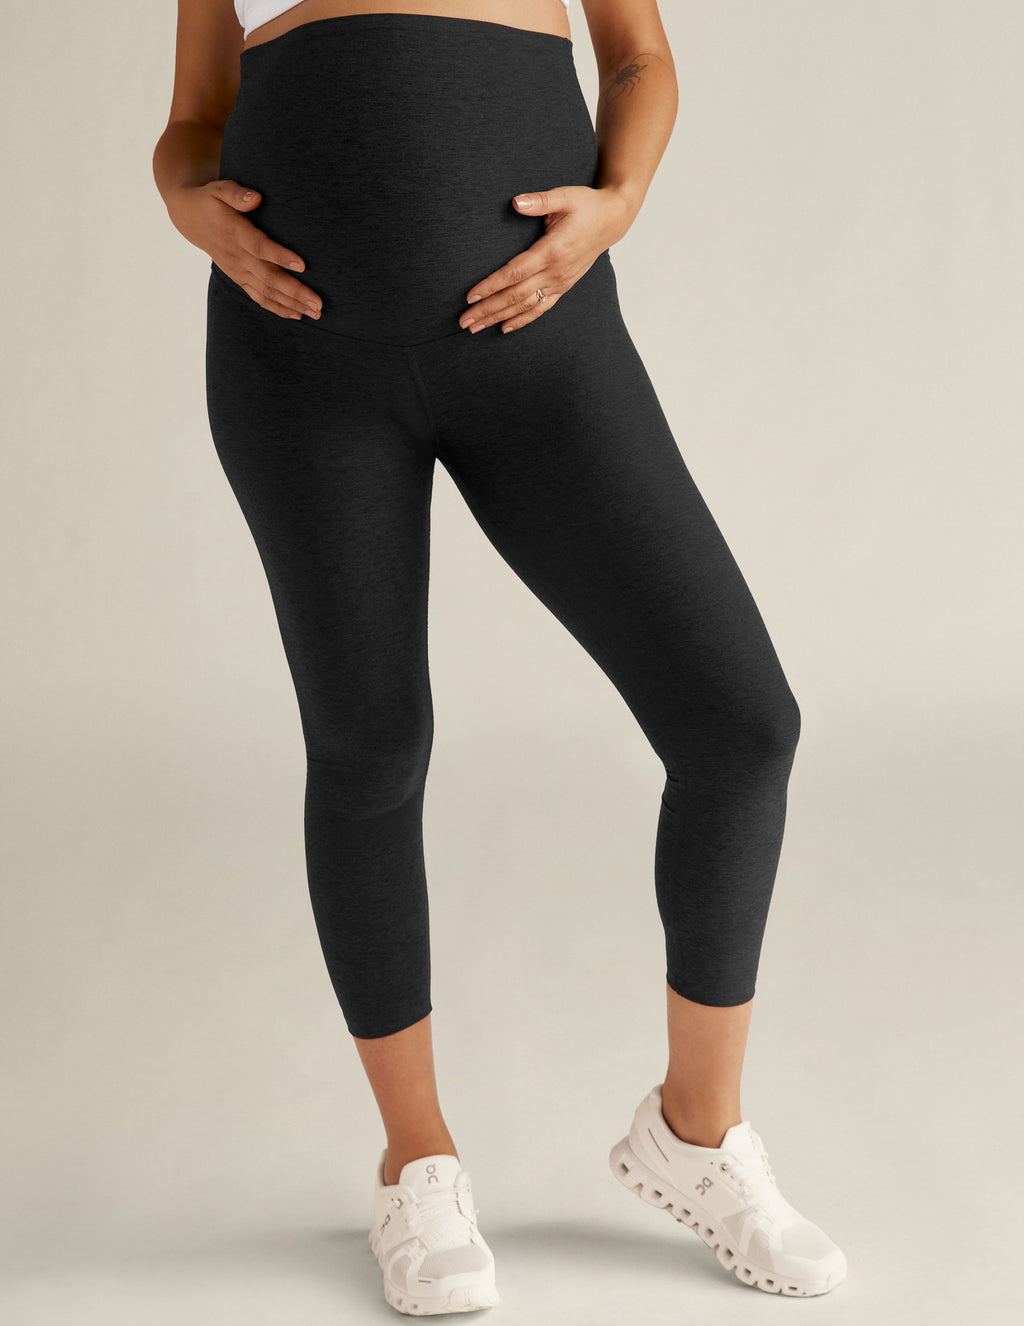 vastwit Maternity Leggings Over The Belly Yoga Pants Women Pregnancy  Stretch Skinny Sports Outfit Black B X-Large at  Women's Clothing  store